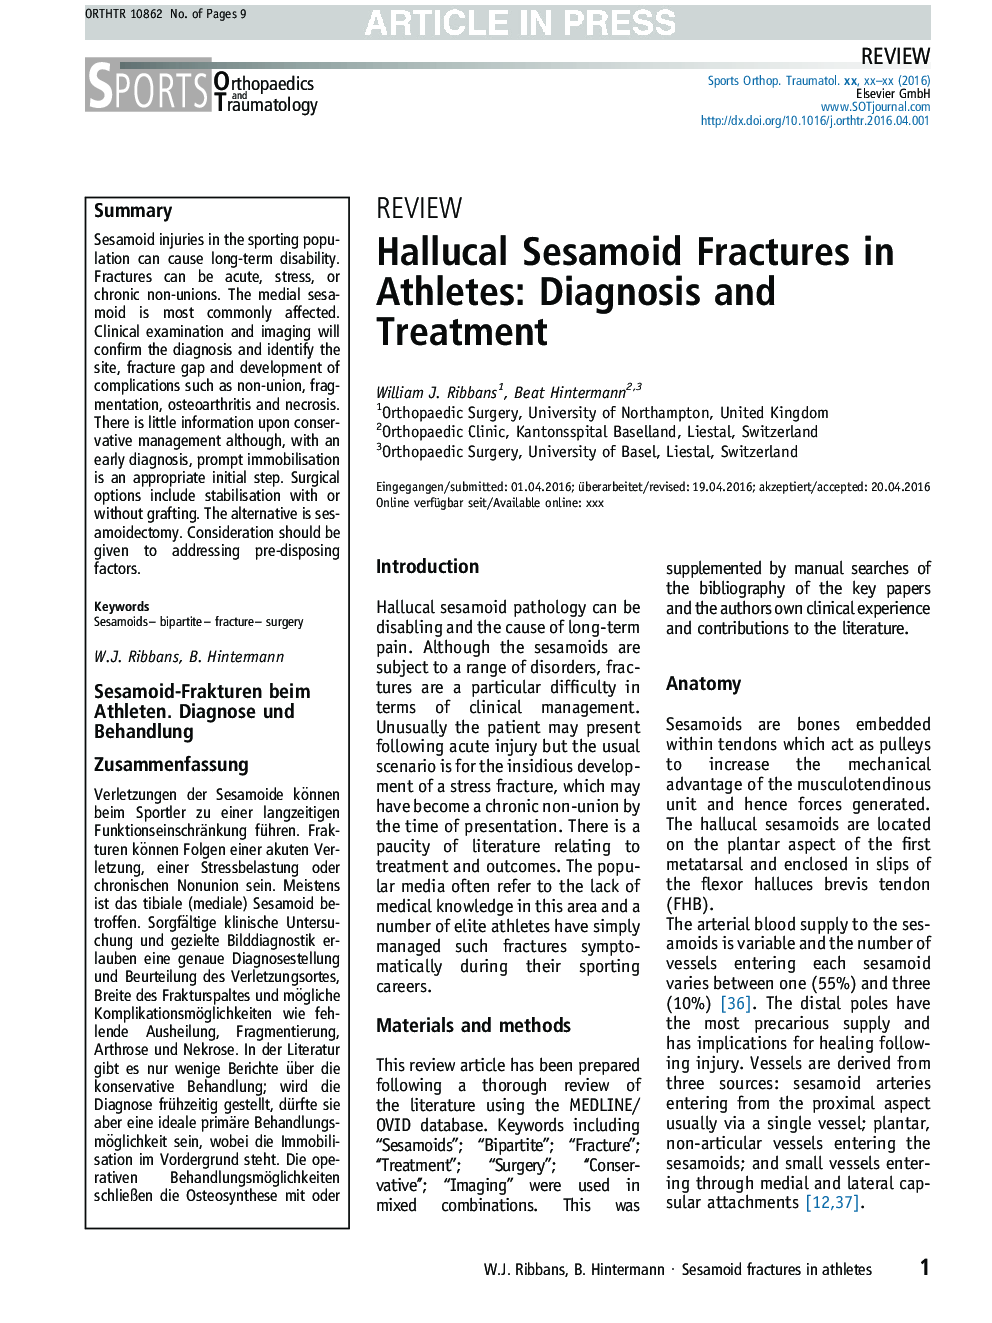 Hallucal Sesamoid Fractures in Athletes: Diagnosis and Treatment